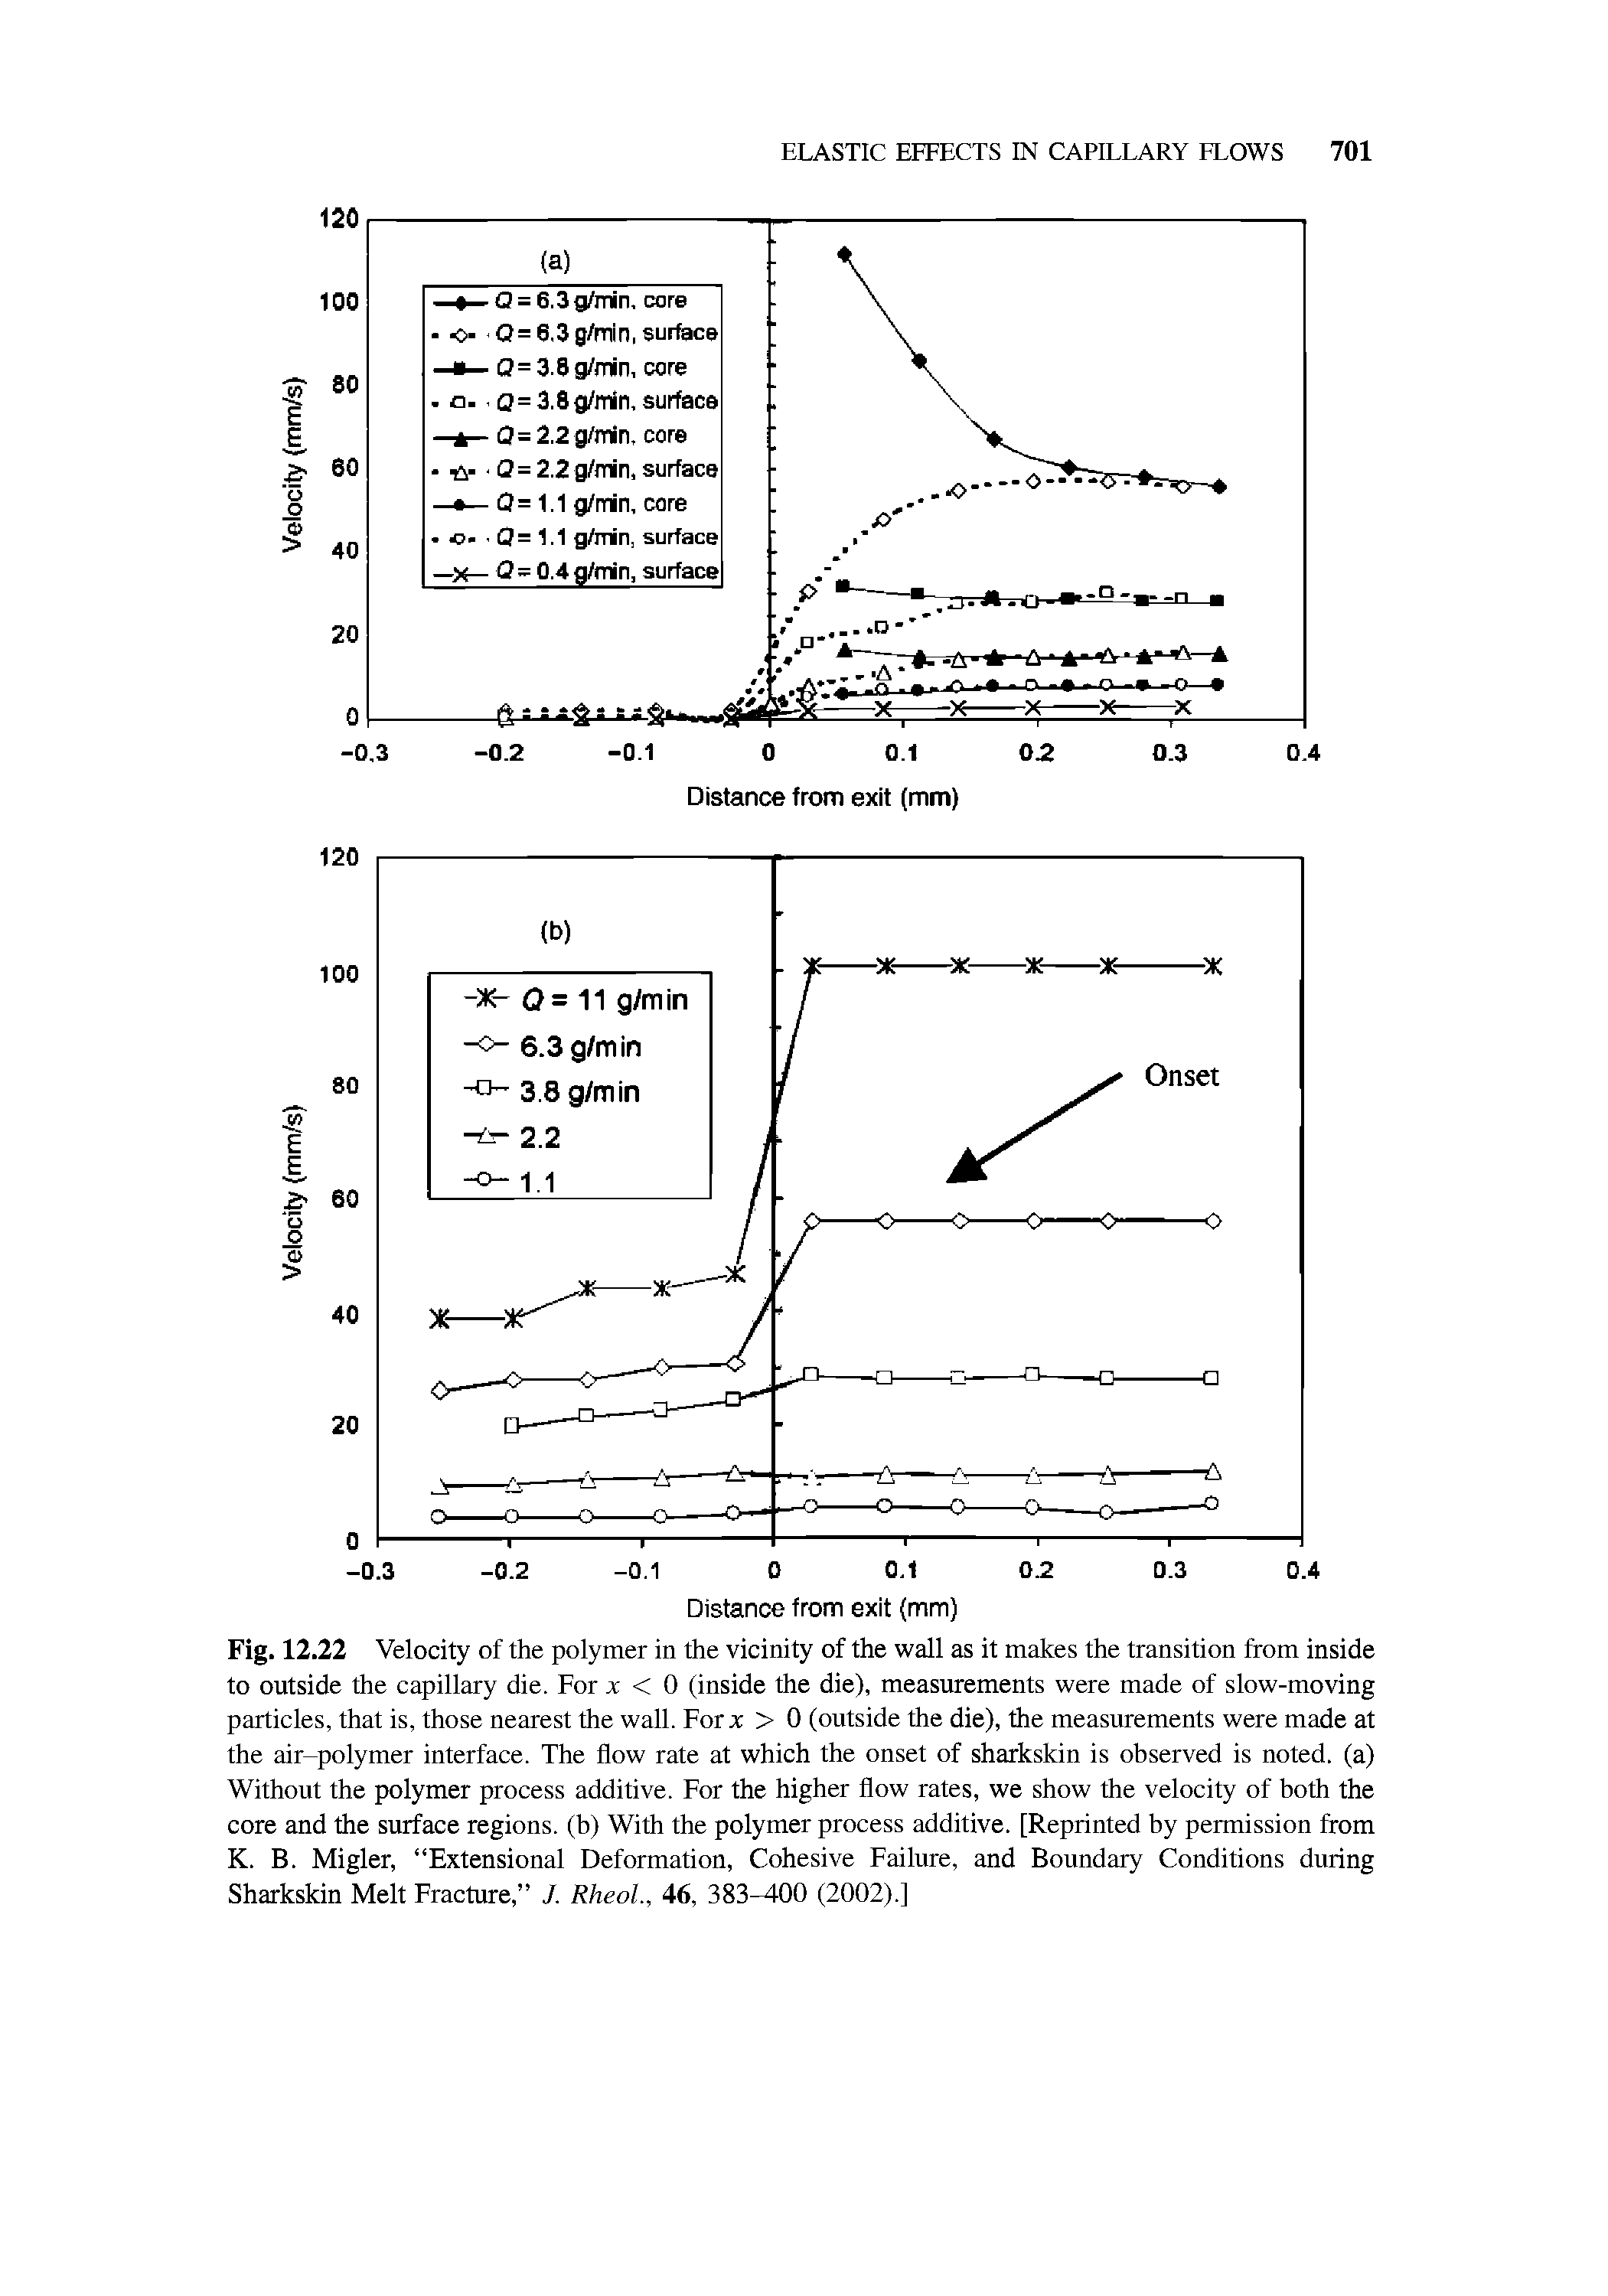 Fig. 12.22 Velocity of the polymer in the vicinity of the wall as it makes the transition from inside to outside the capillary die. For x < 0 (inside the die), measurements were made of slow-moving particles, that is, those nearest the wall. Forx > 0 (outside the die), the measurements were made at the air-polymer interface. The flow rate at which the onset of sharkskin is observed is noted, (a) Without the polymer process additive. For the higher flow rates, we show the velocity of both the core and the surface regions, (b) With the polymer process additive. [Reprinted by permission from K. B. Migler, Extensional Deformation, Cohesive Failure, and Boundary Conditions during Sharkskin Melt Fracture, J. Rheol., 46, 383-400 (2002).]...